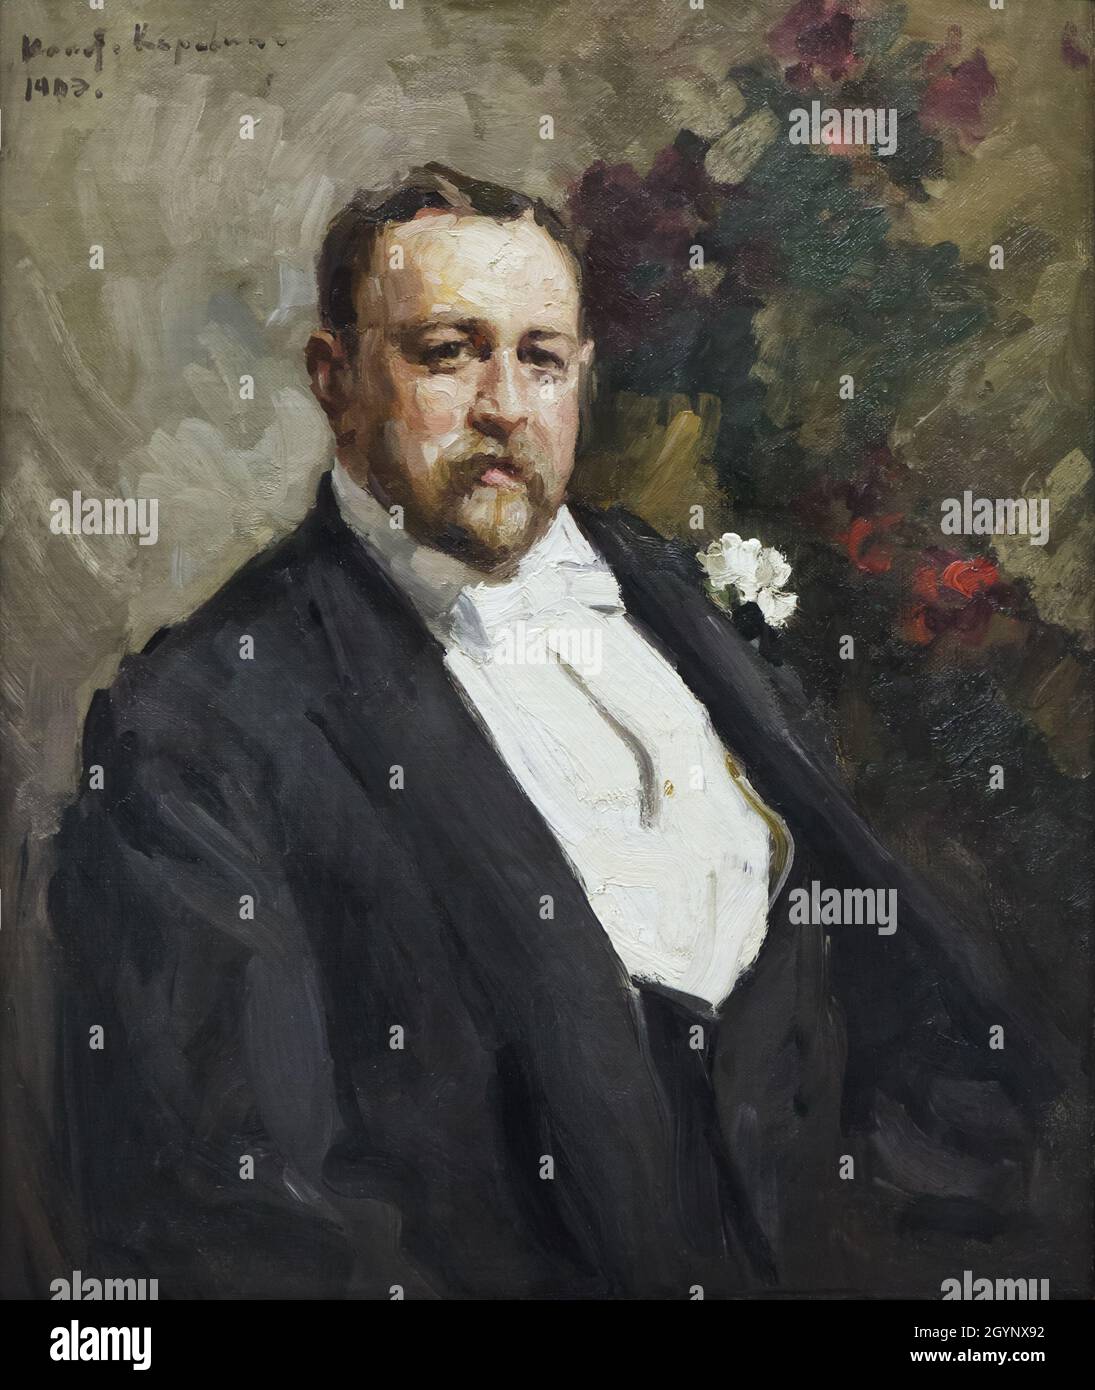 Painting 'Portrait of Ivan Abramovich Morozov' by Russian Impressionist painter Konstantin Korovin (1903) on display at the exhibition 'Icons of Modern Art from the Morozov Collection' in the Fondation Louis Vuitton in Paris, France. Ivan Abramovich Morozov was a Russian art collector owned one of the best collections of French modernist art in the world. The exhibition devoted to the Morozov Collection runs till 22 February 2022. Stock Photo